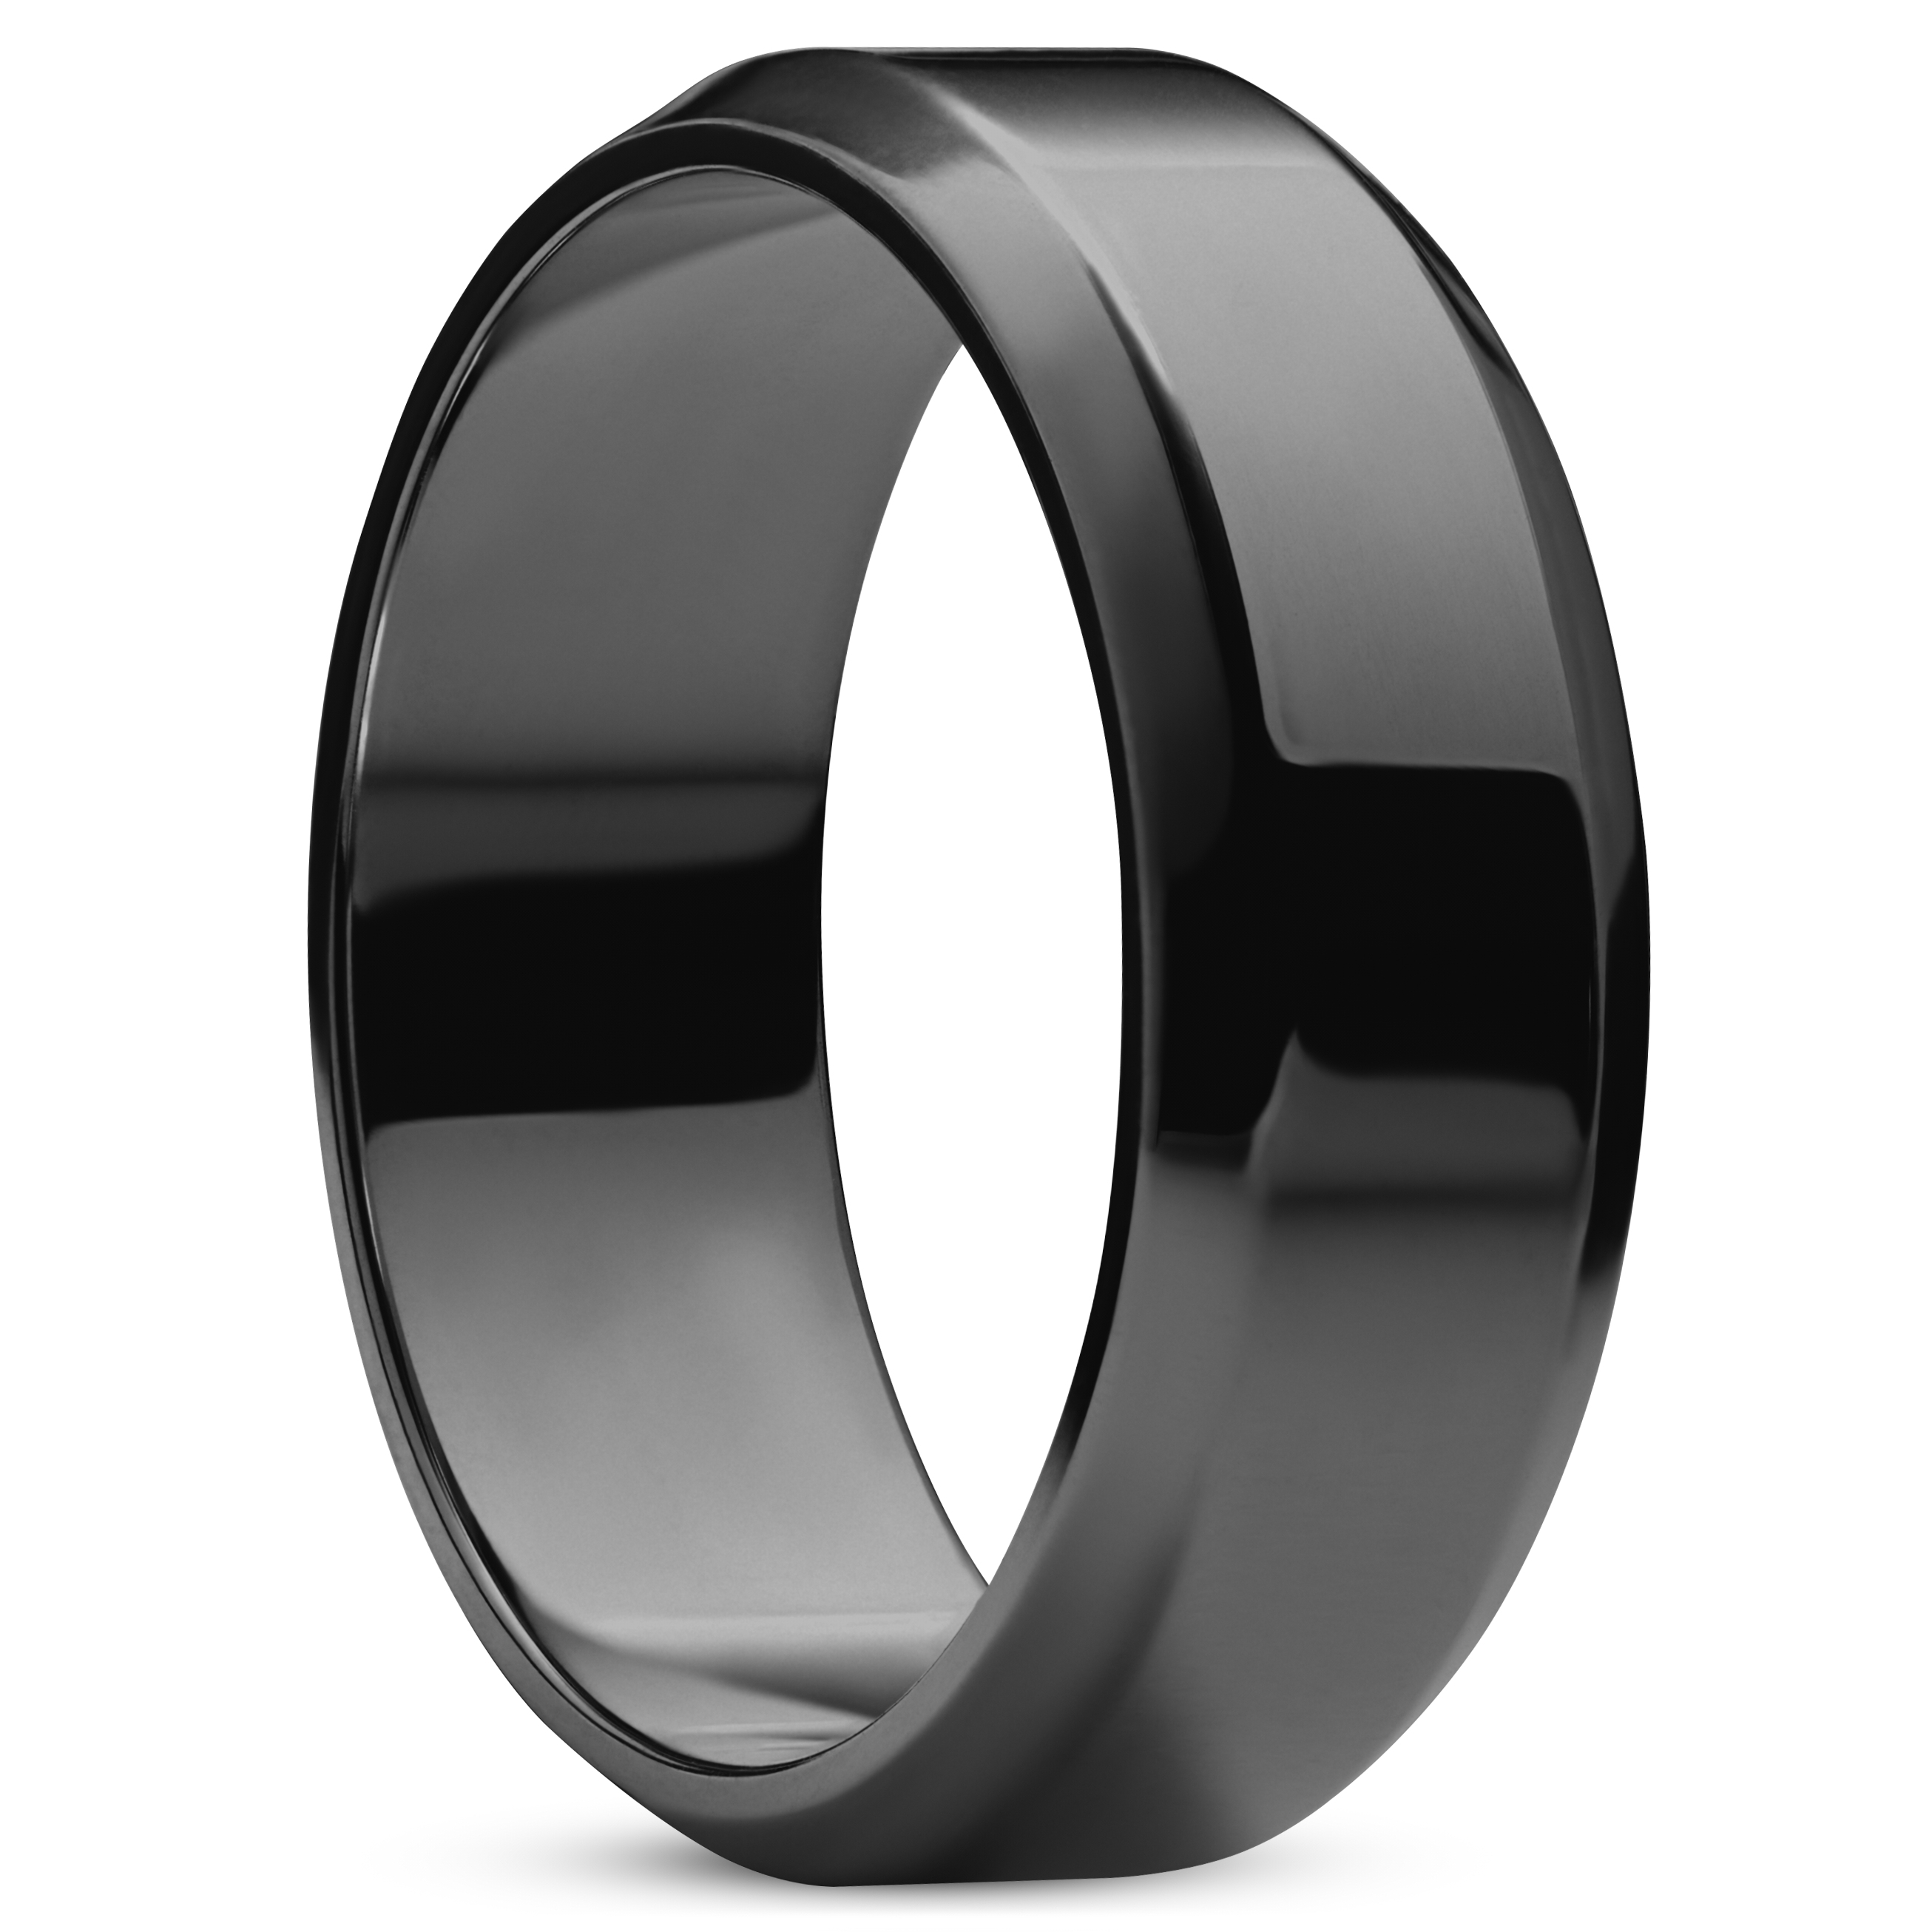 Stainless Steel Ring, 8mm Ring, Black Ring, Metal Band, Thick Ring, Chunky  Ring, Minimalist Ring, Man Ring, Mens Jewellery, Rings for Women 